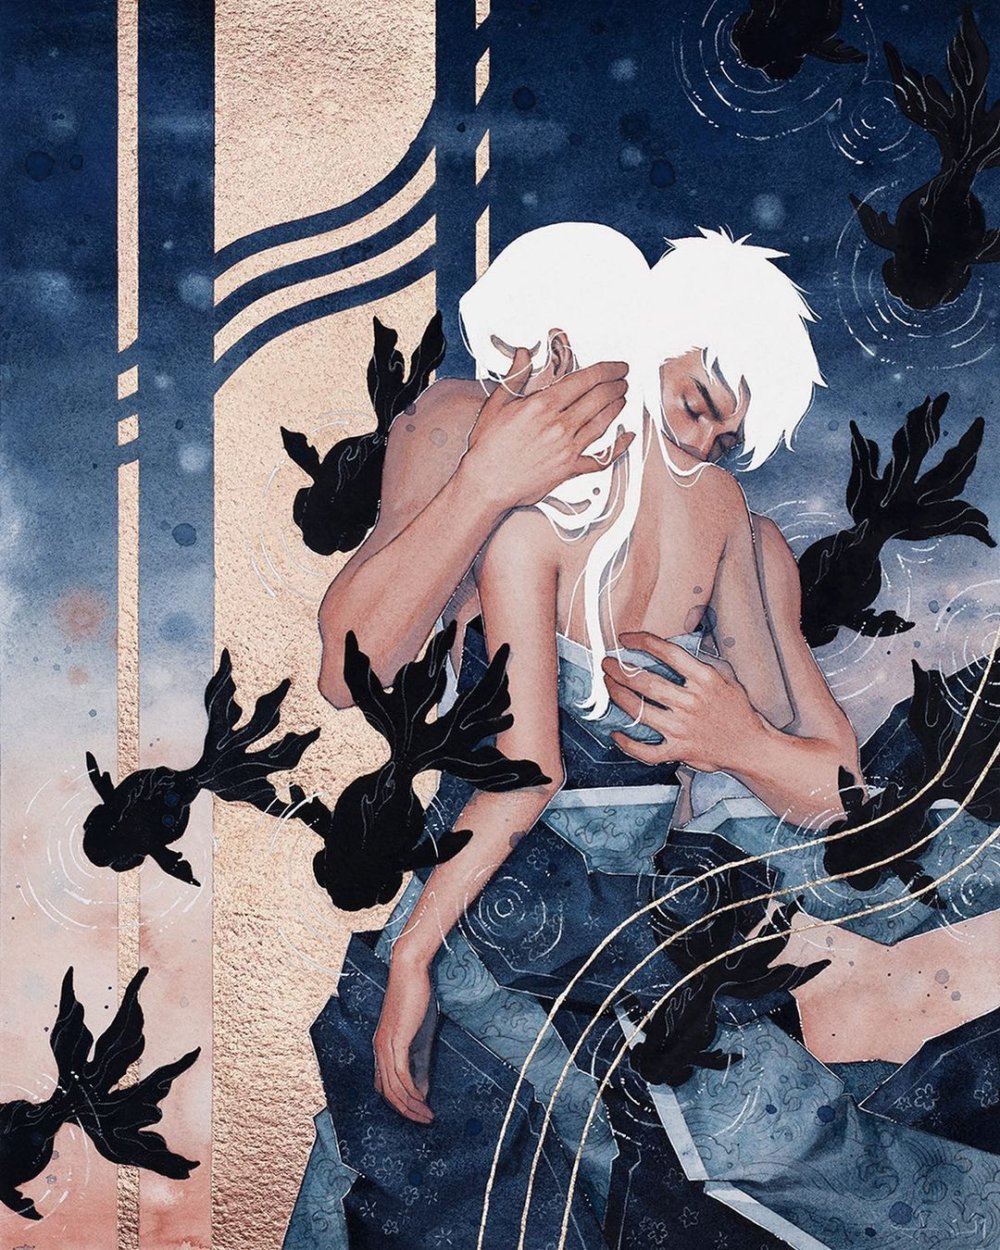 Whimsical And Ethereal Watercolors Of Women In Deep Moments Of Intimacy By Hieu Nguyen 11